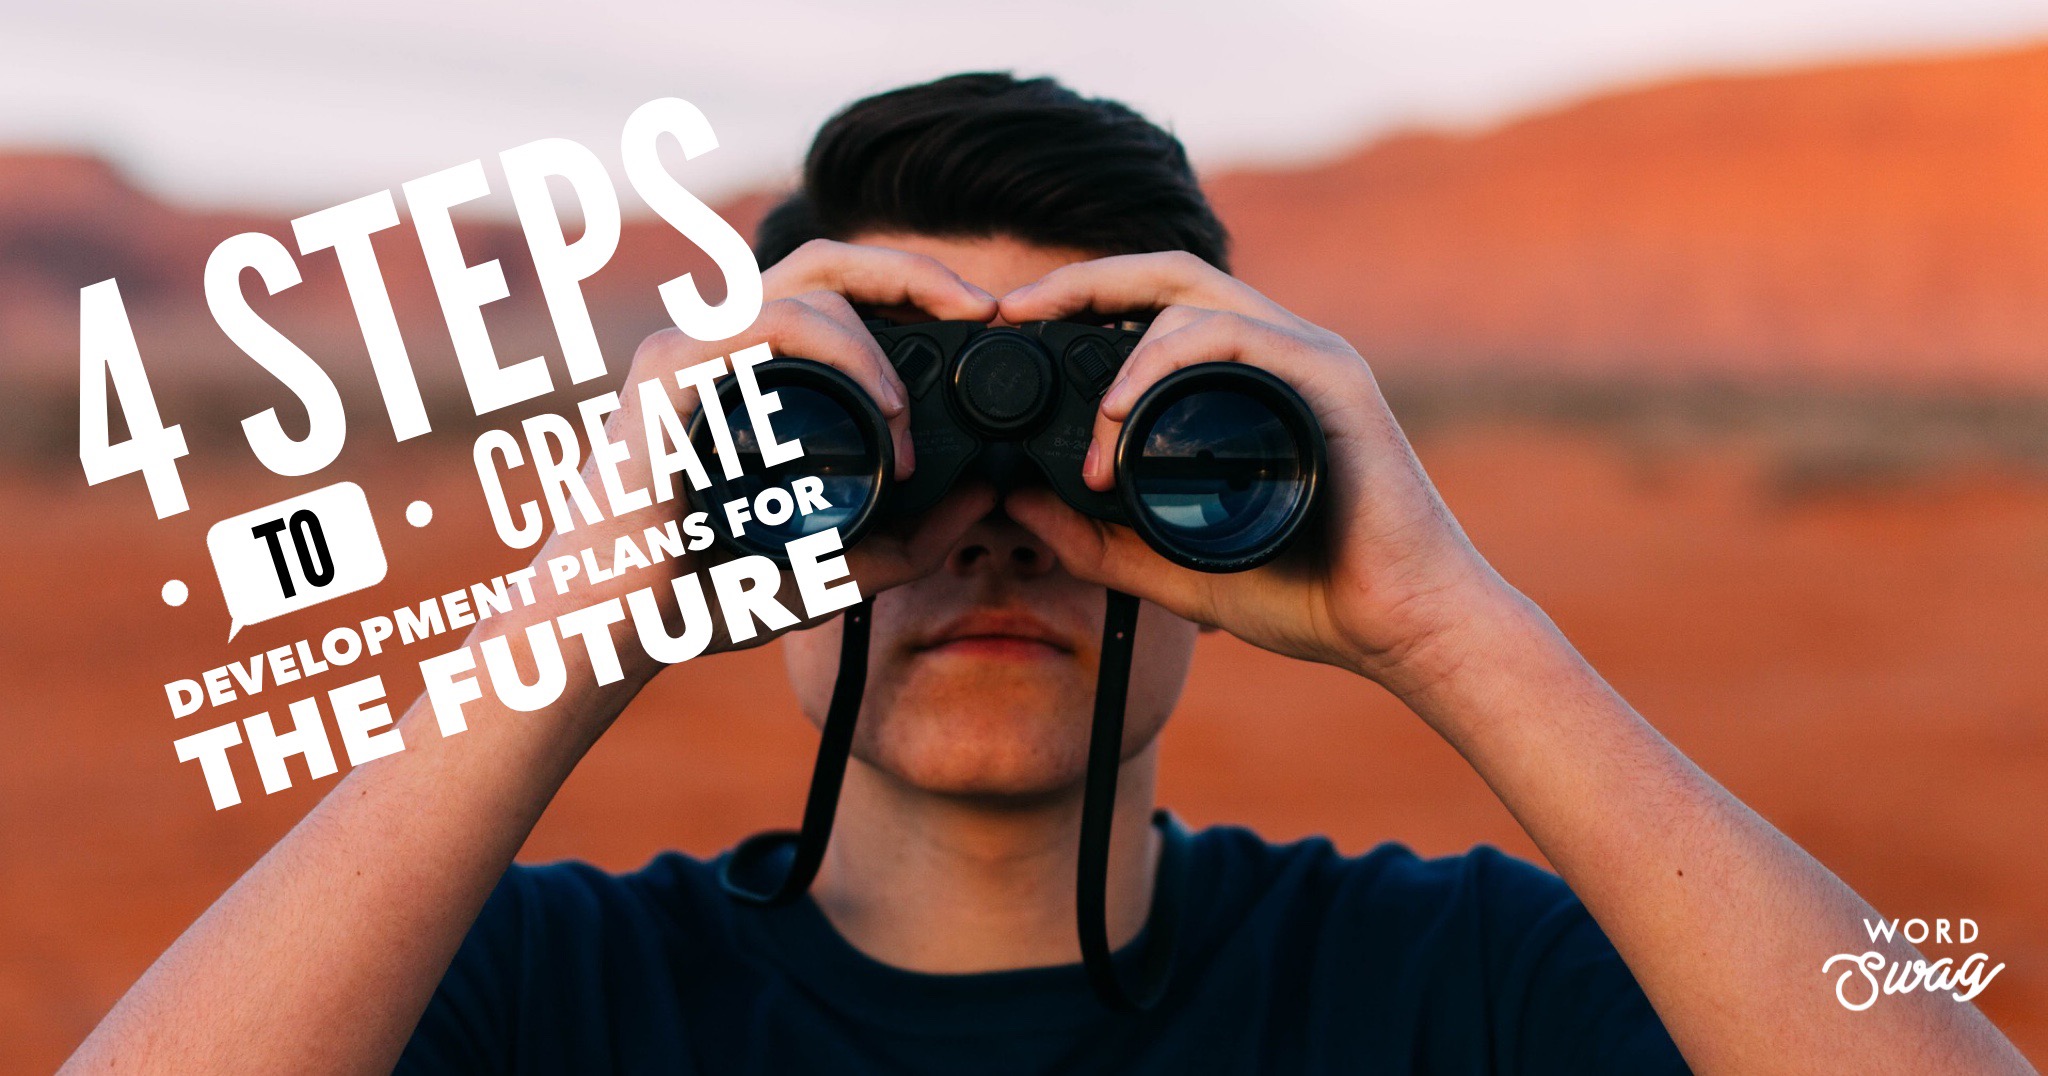 4 steps to create development plans for the future